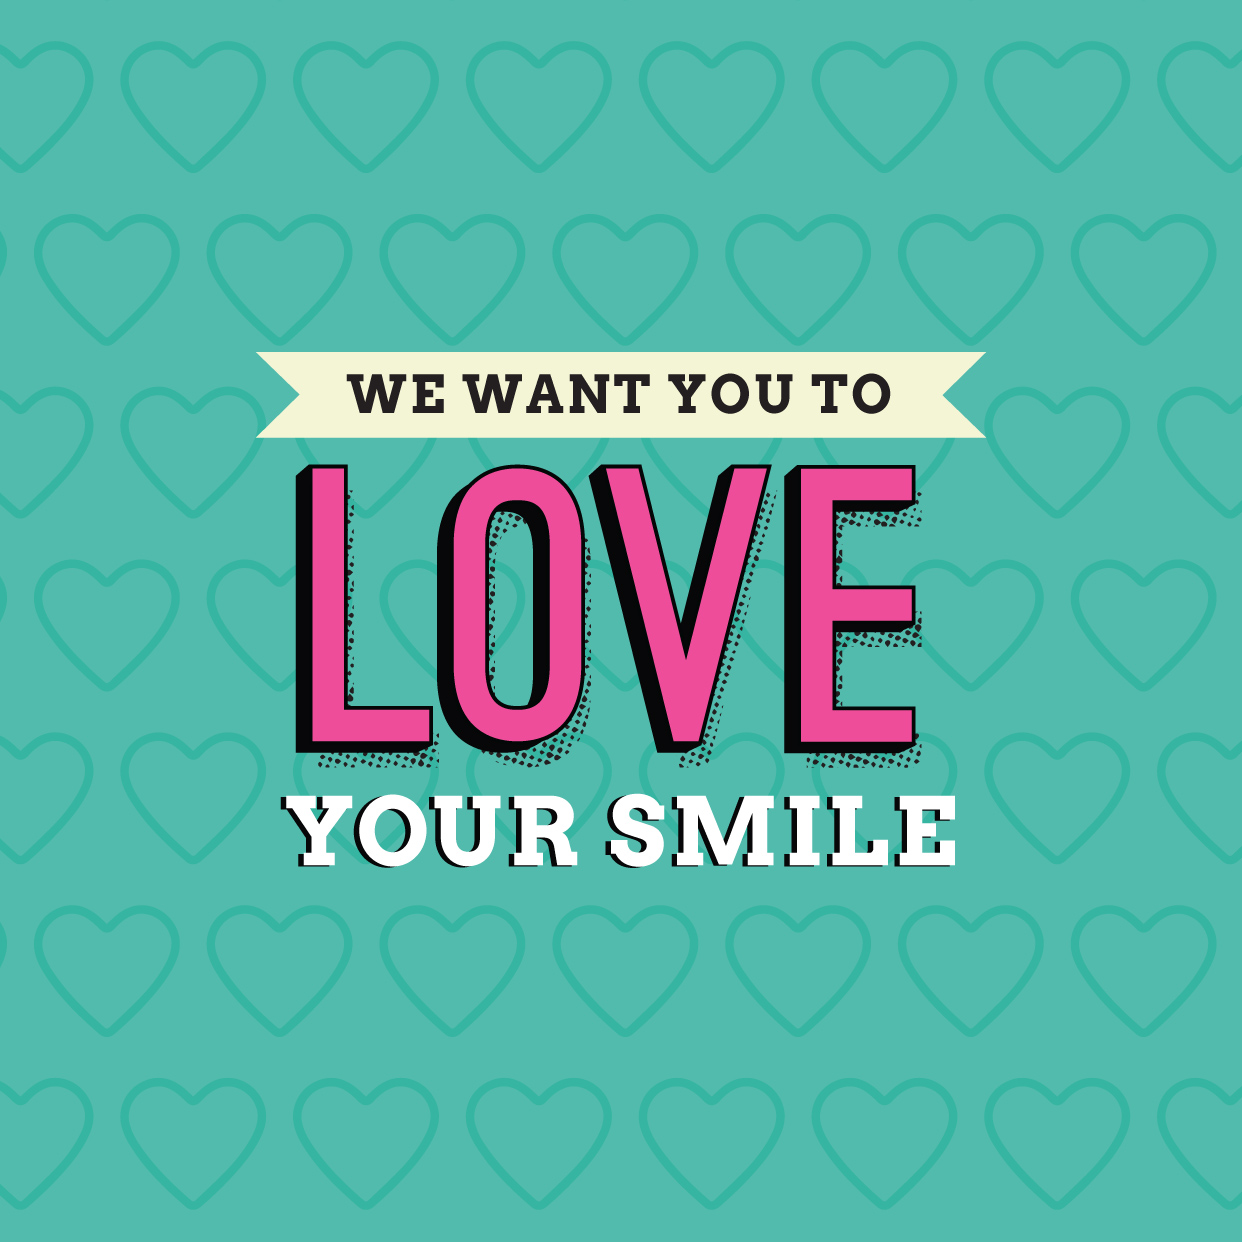 It’s Time To Love Your Smile!